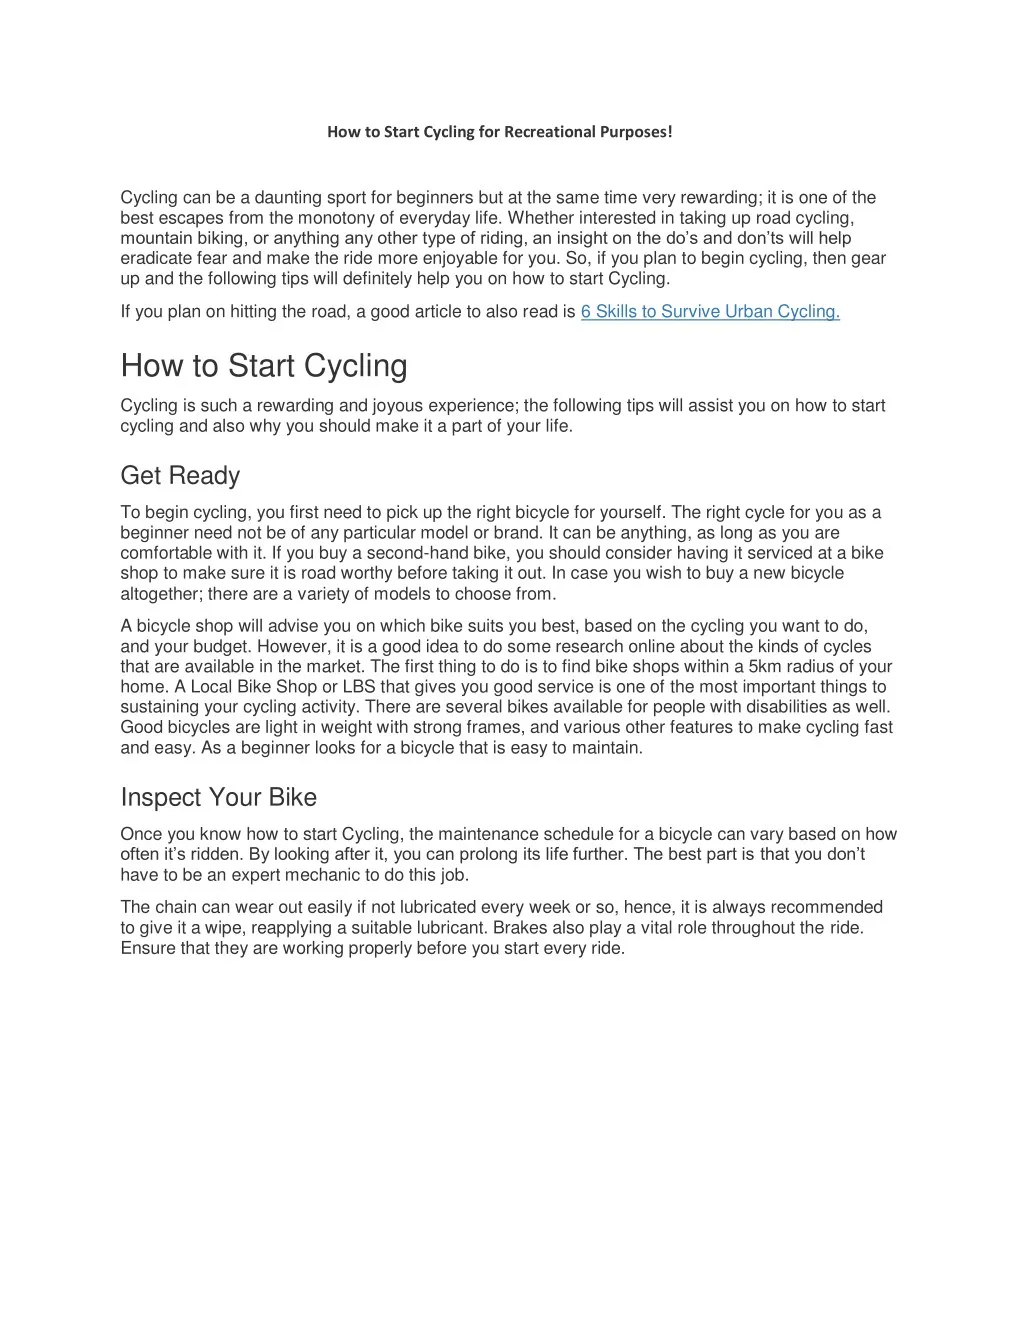 how to start cycling for recreational purposes